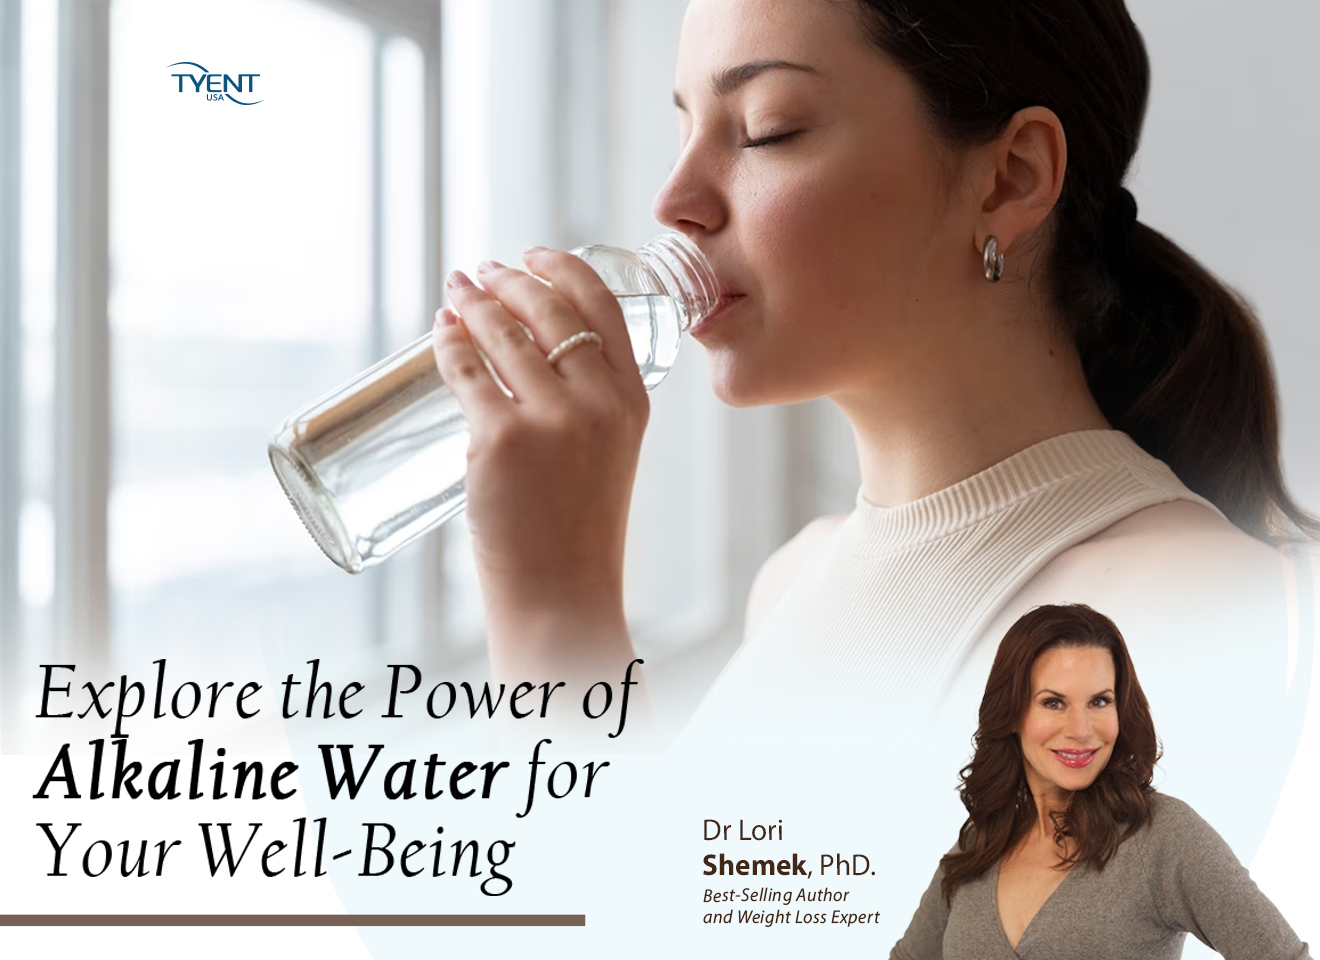 Explore the Power of Alkaline Water for Your Well-Being